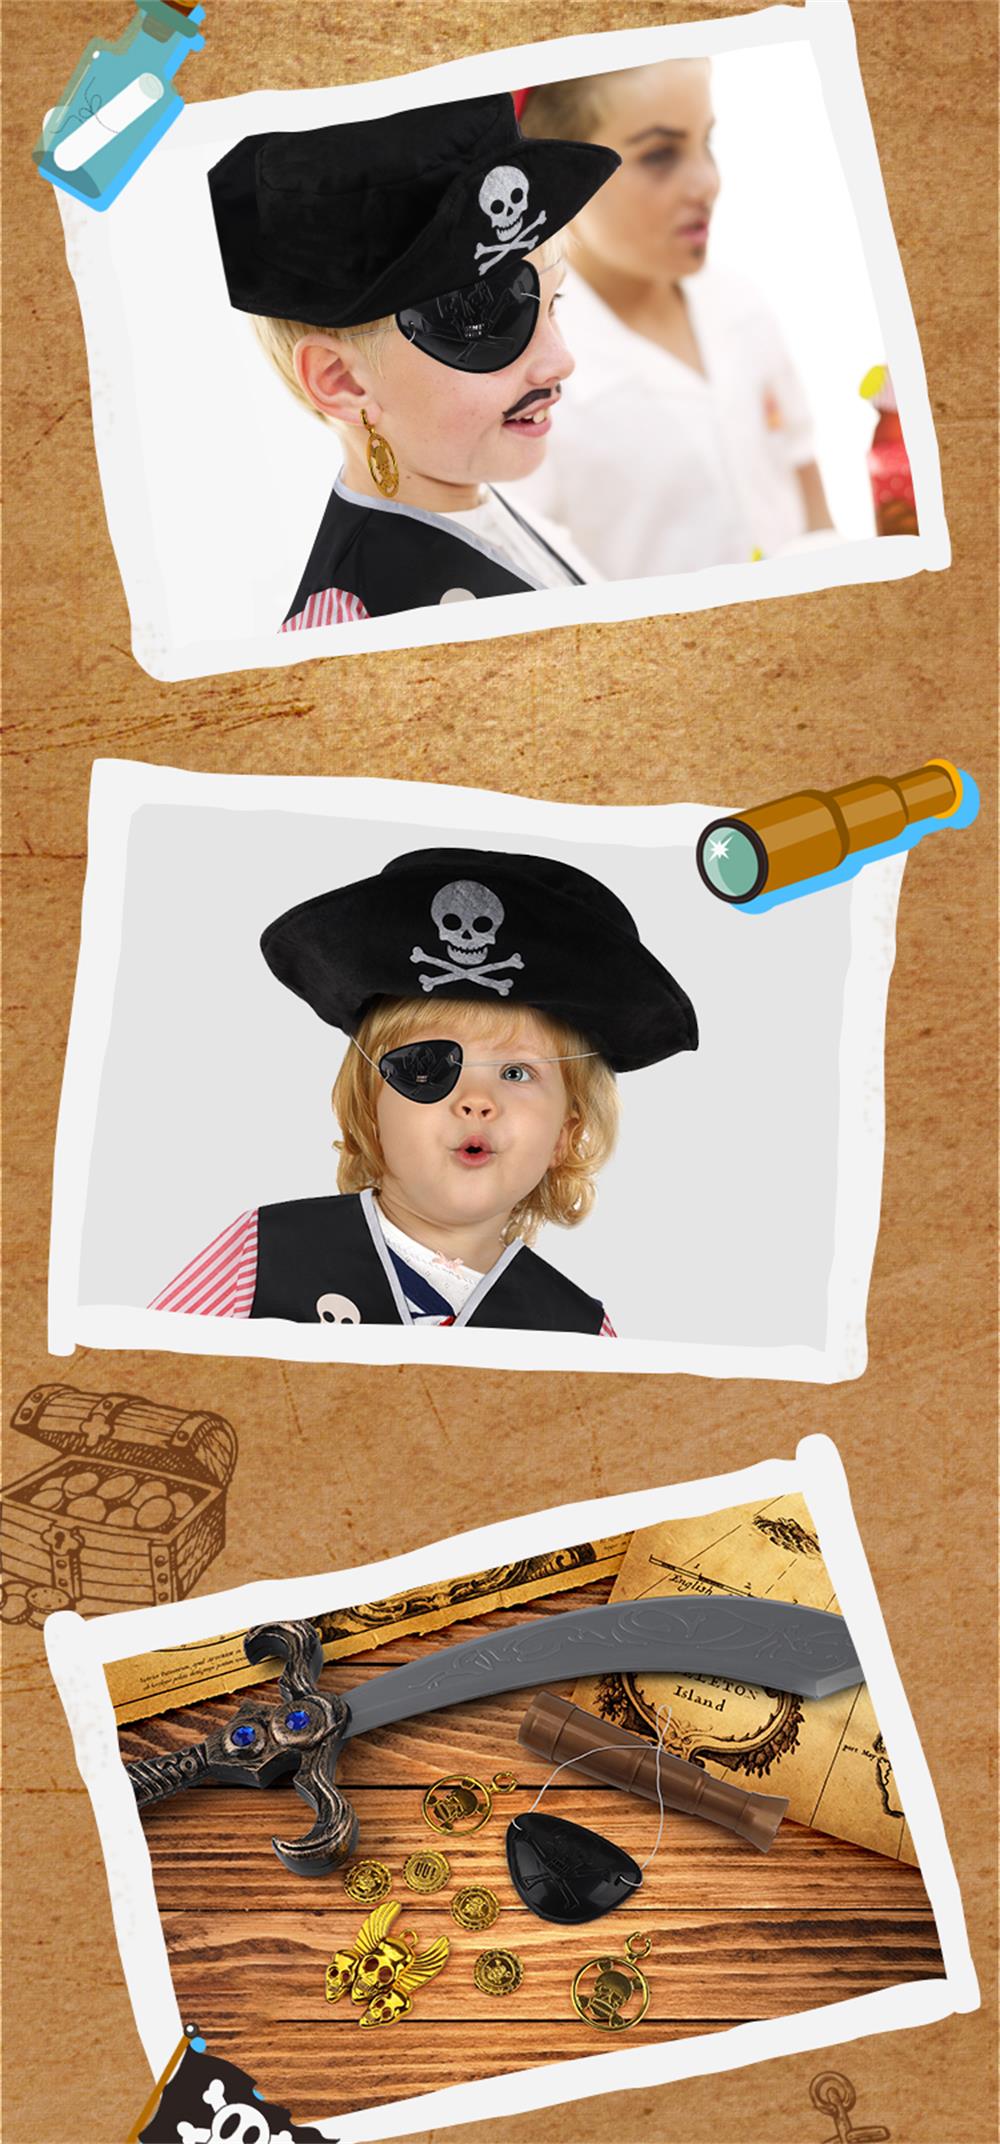 Pirate Costume Role Play Dress Up Set_03